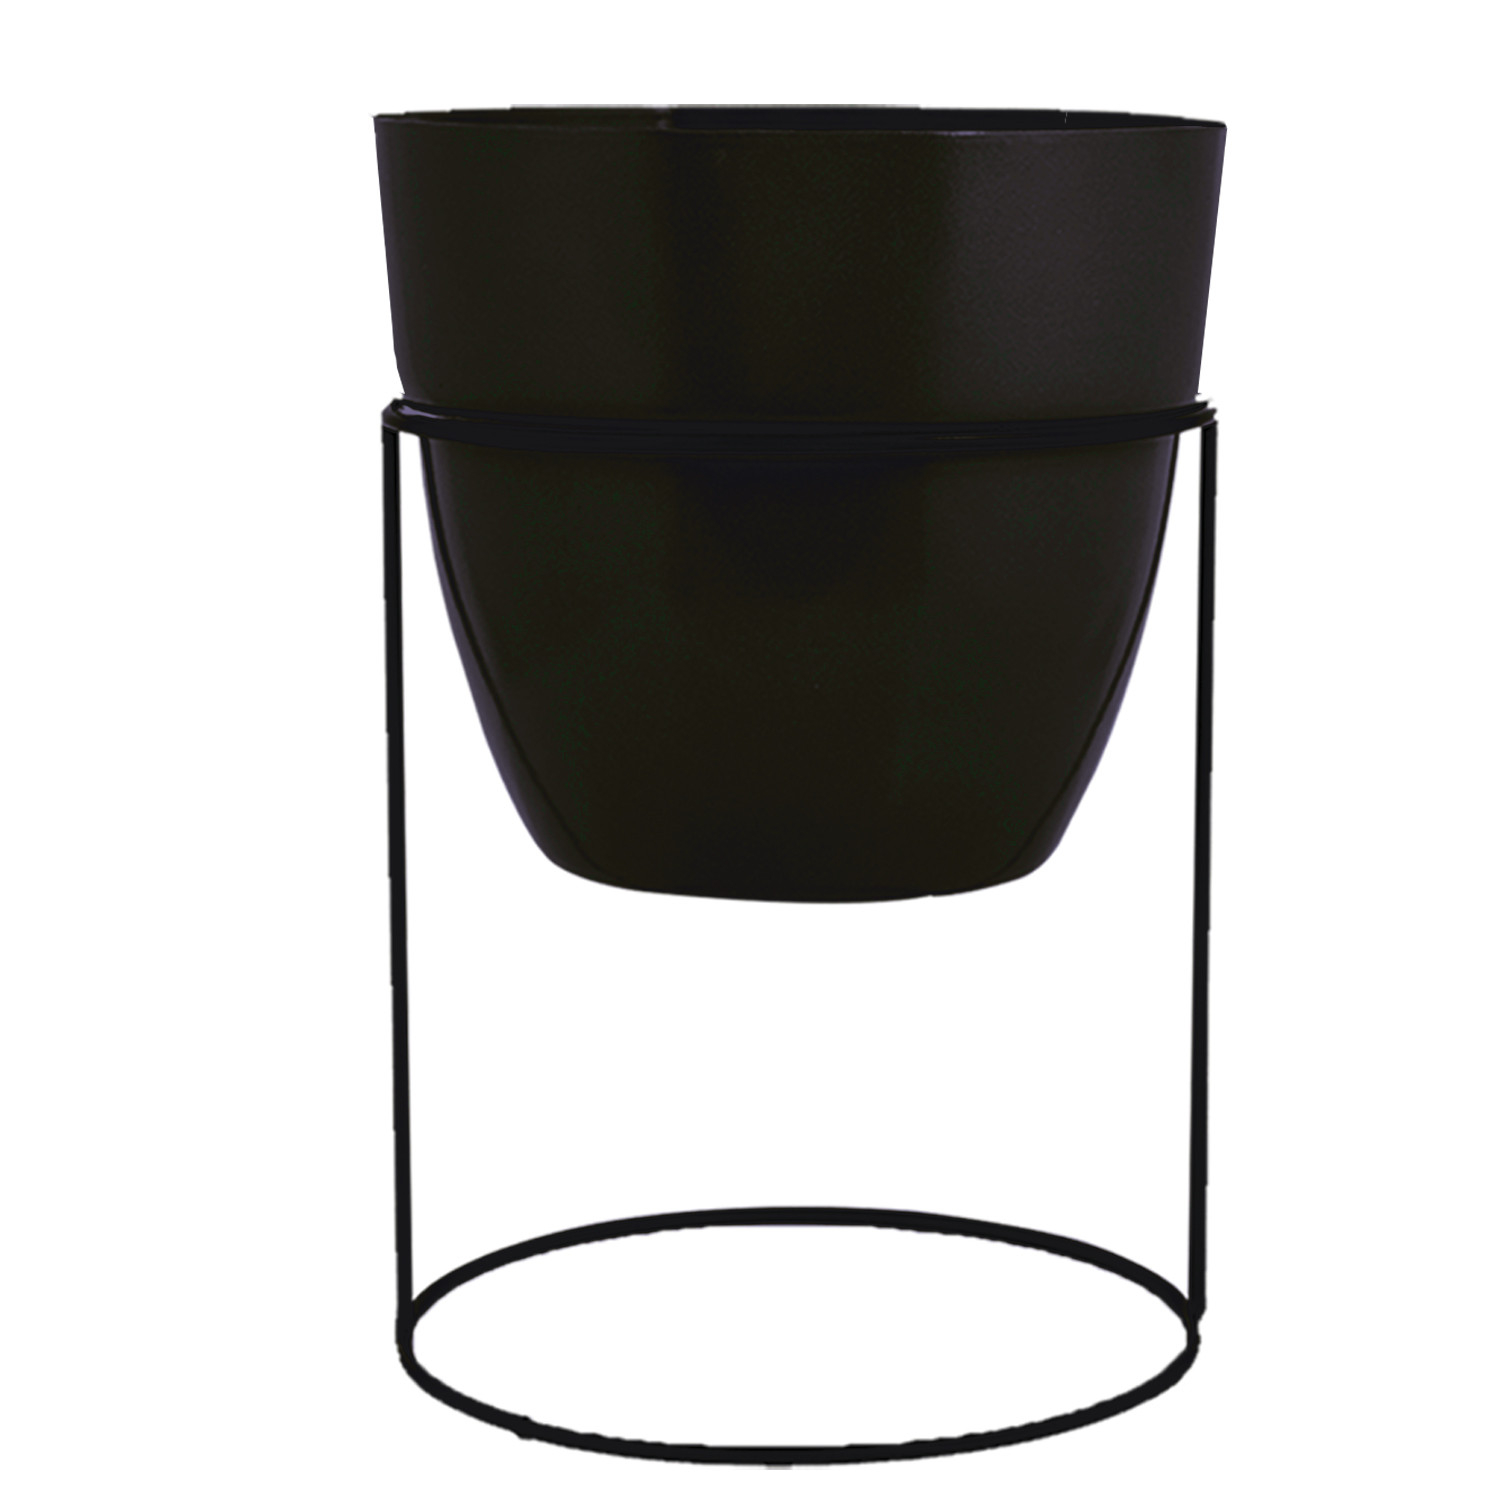 Kuber Industries Metal Planter|Decorative Modern Indoor Desk Pot|Iron Table Stand Flower Planter Pot For Home Décor,8.5 Inches,Pack of 2 (Black & Terracotta)